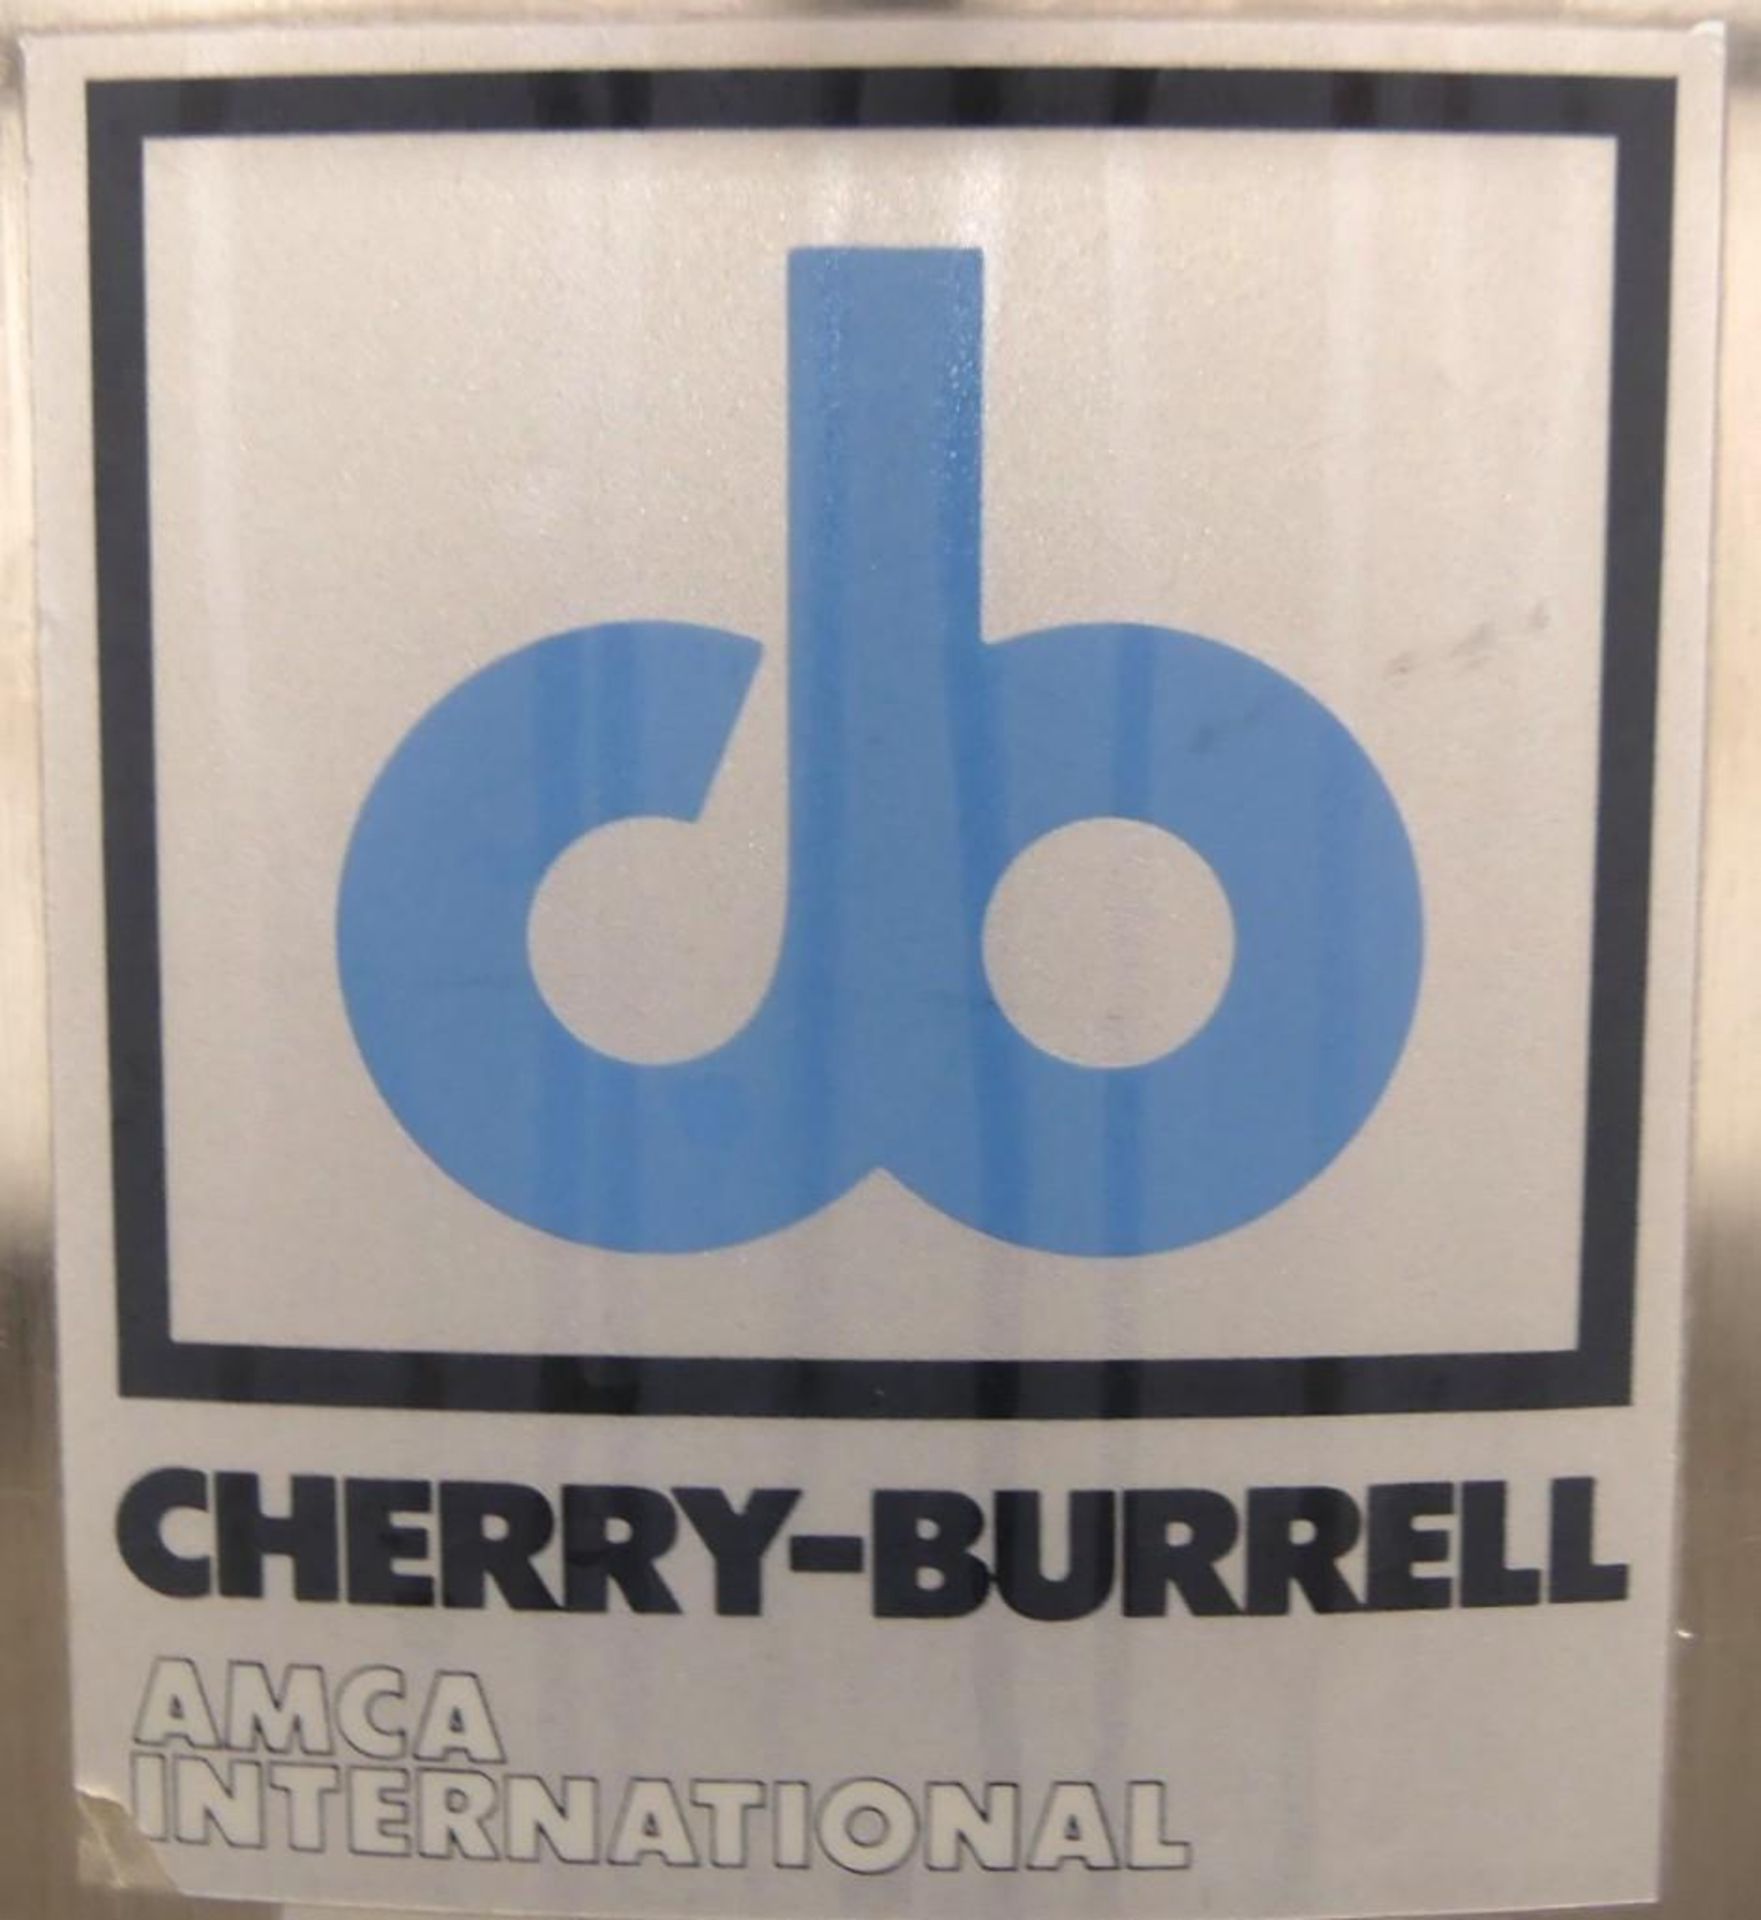 Cherry Burrell 75 Gallon Agitated Stainless Steel Tank - Image 18 of 18